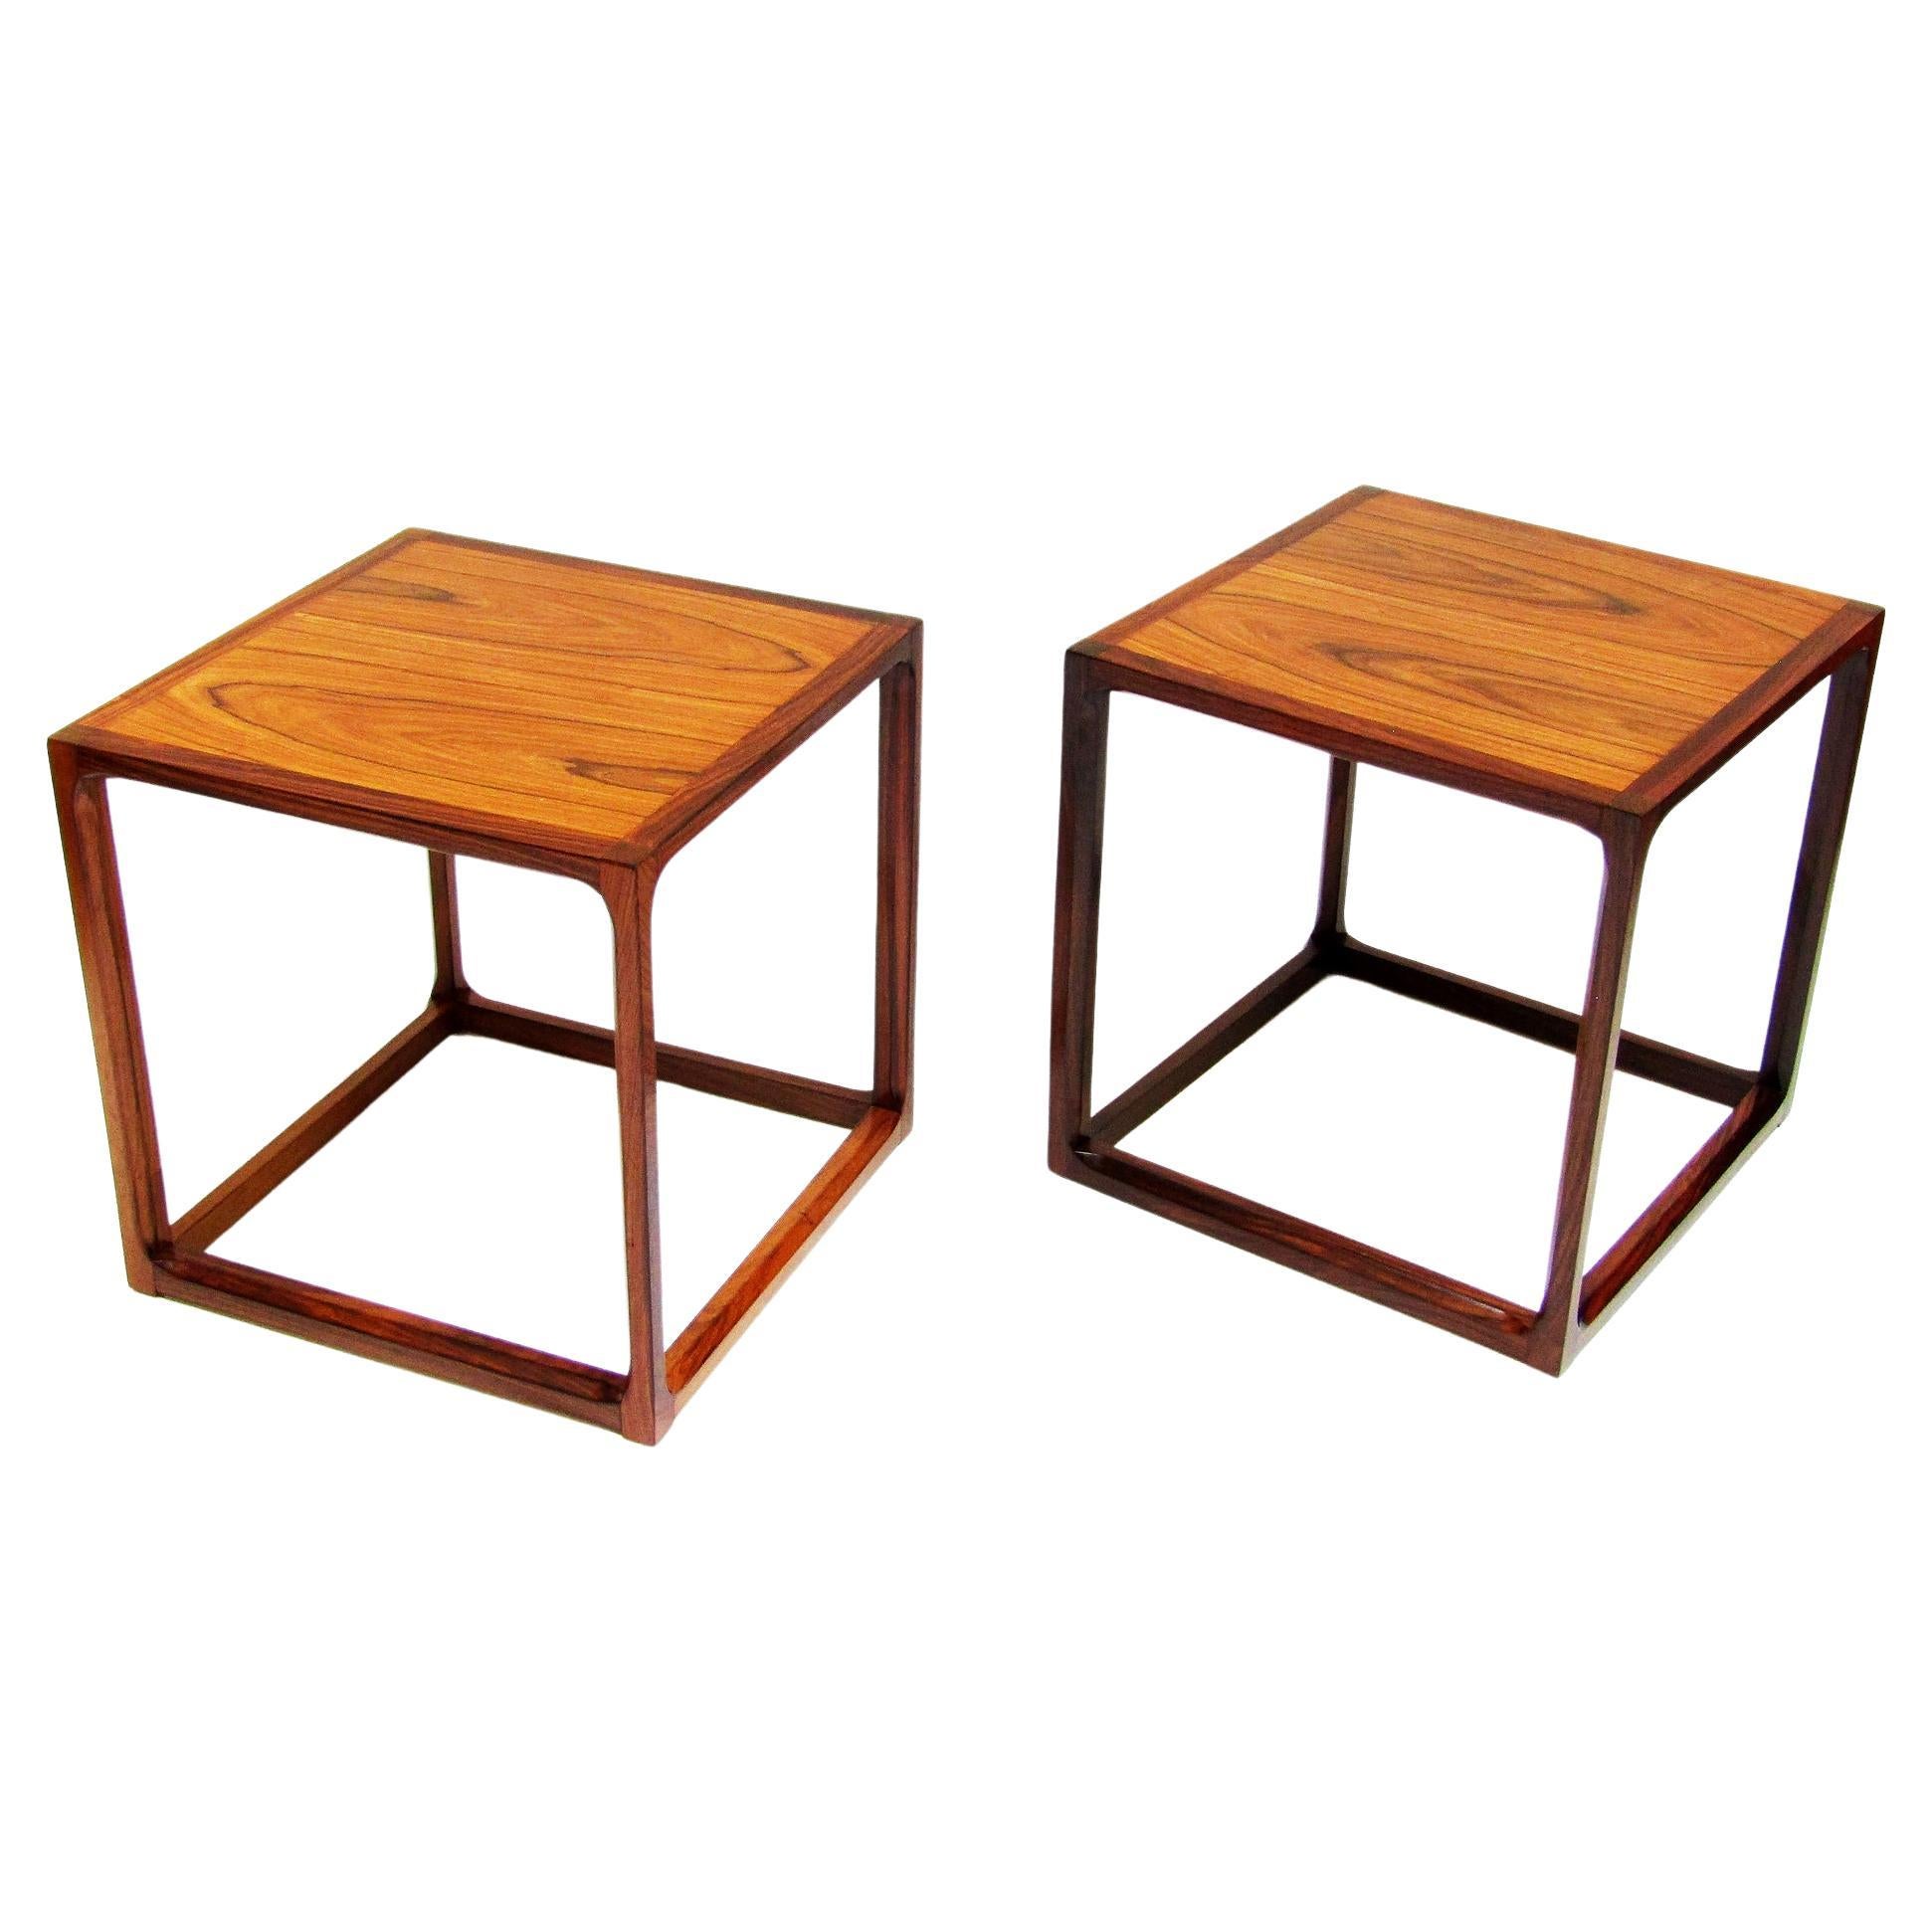 Pair of Danish Rosewood 1960s Cube Lamp Tables / Nightstands by Kai Kristiansen For Sale